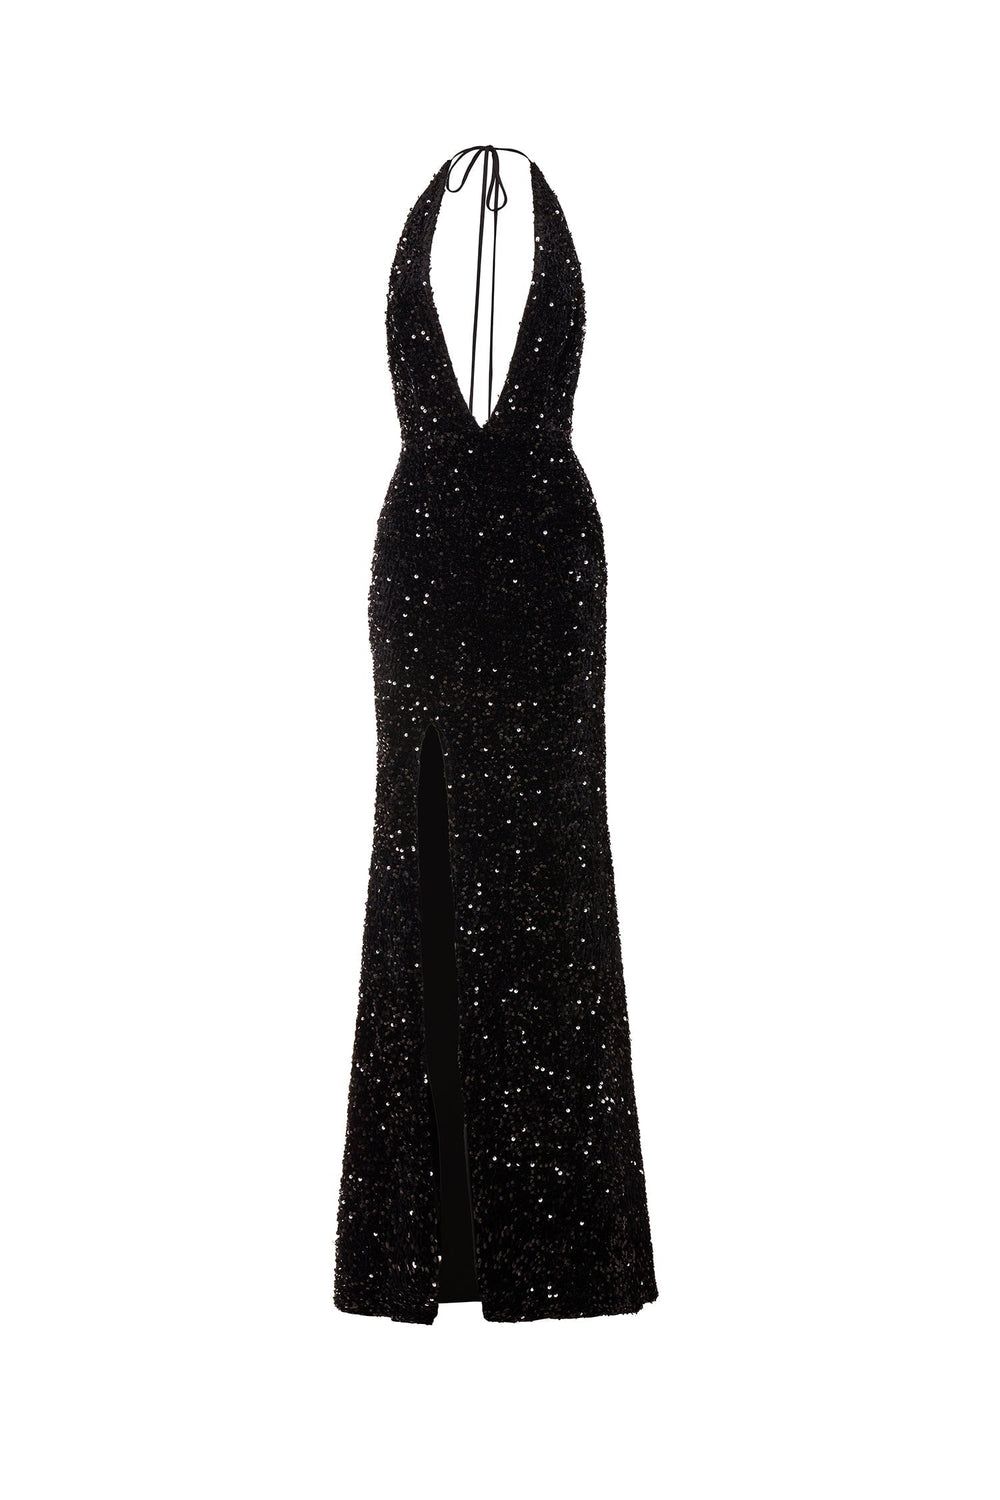 Lili - Black Sequin Plunge Neck Dress with Criss Cross Back